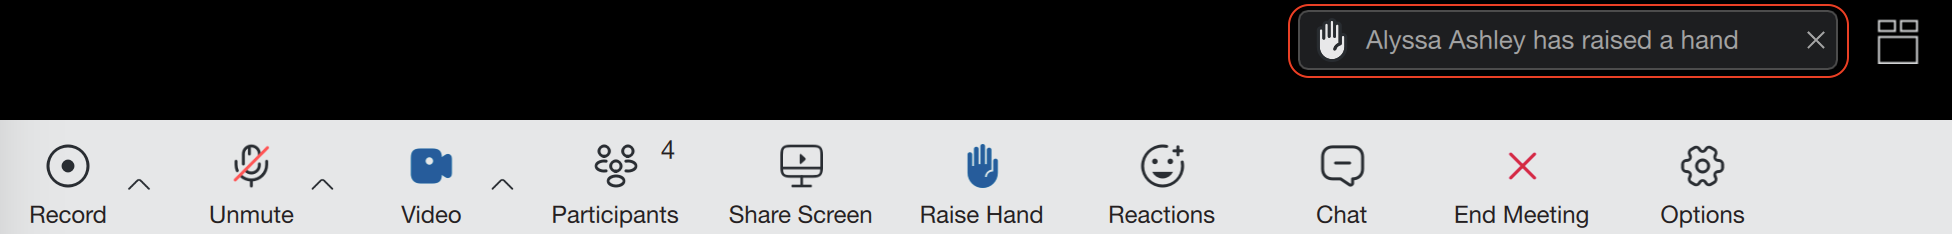 7.0_notification_message_for_raised_hand_on_meeting_screen.png